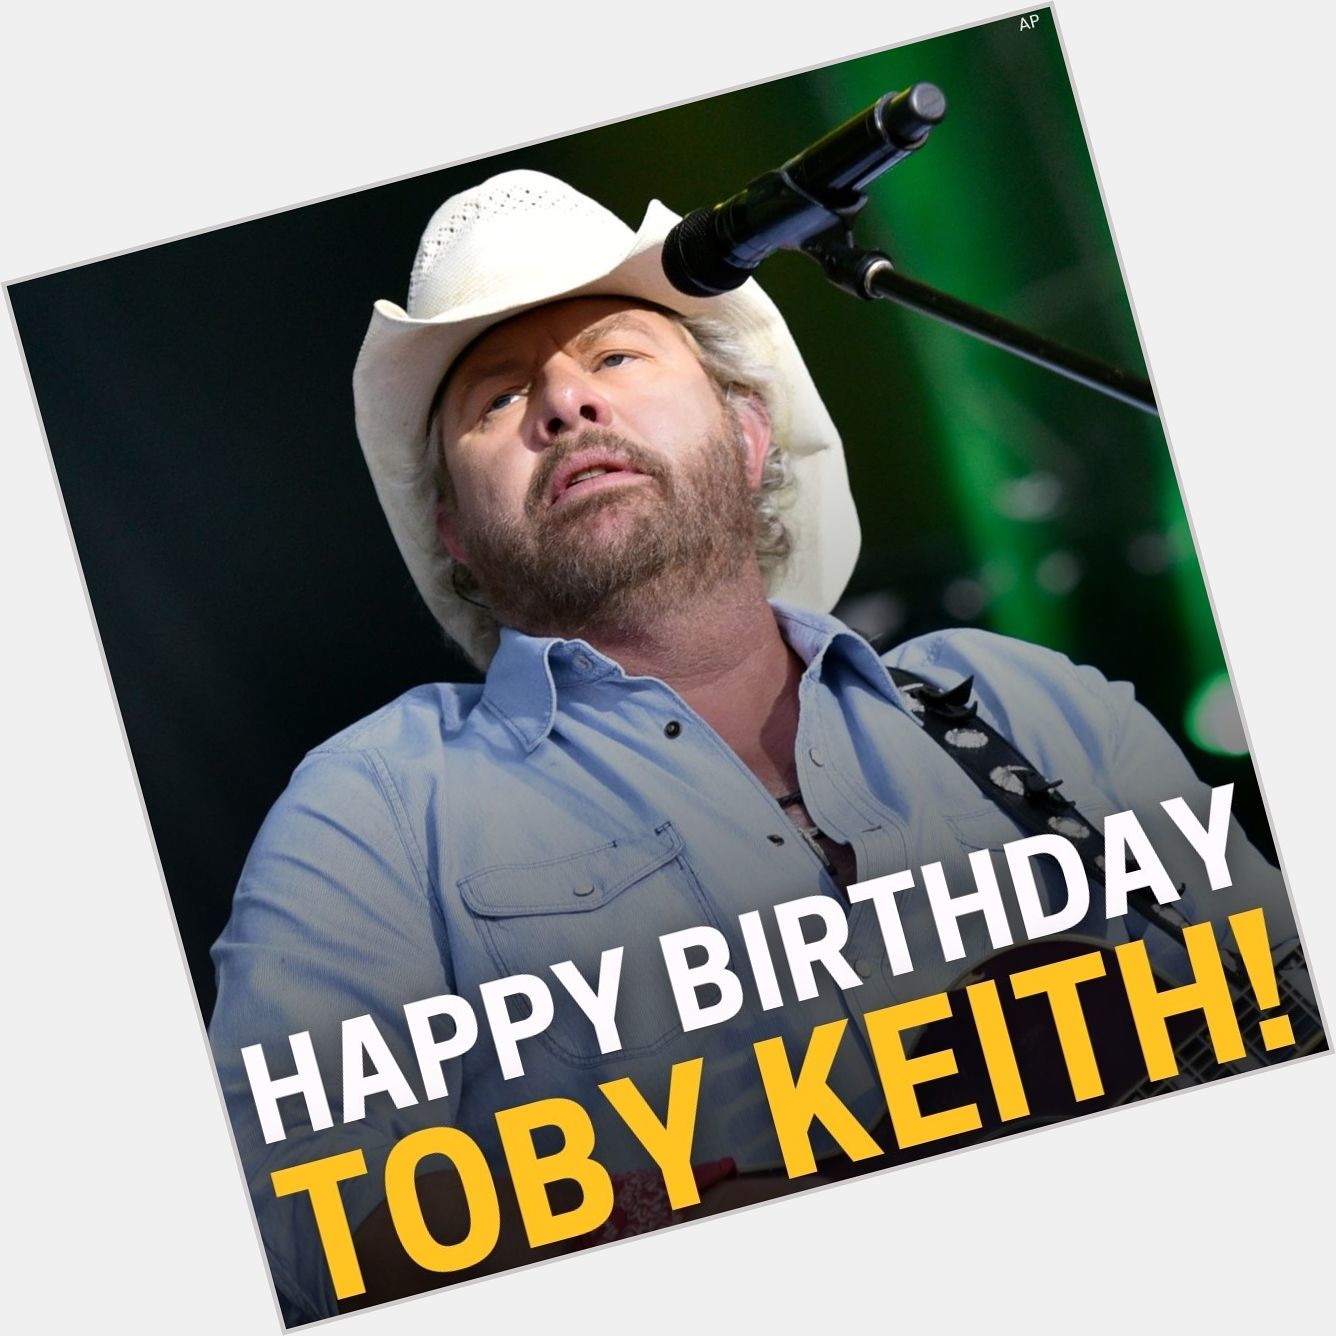 Happy Birthday, Toby Keith! What\s your favorite song by the country artist? 